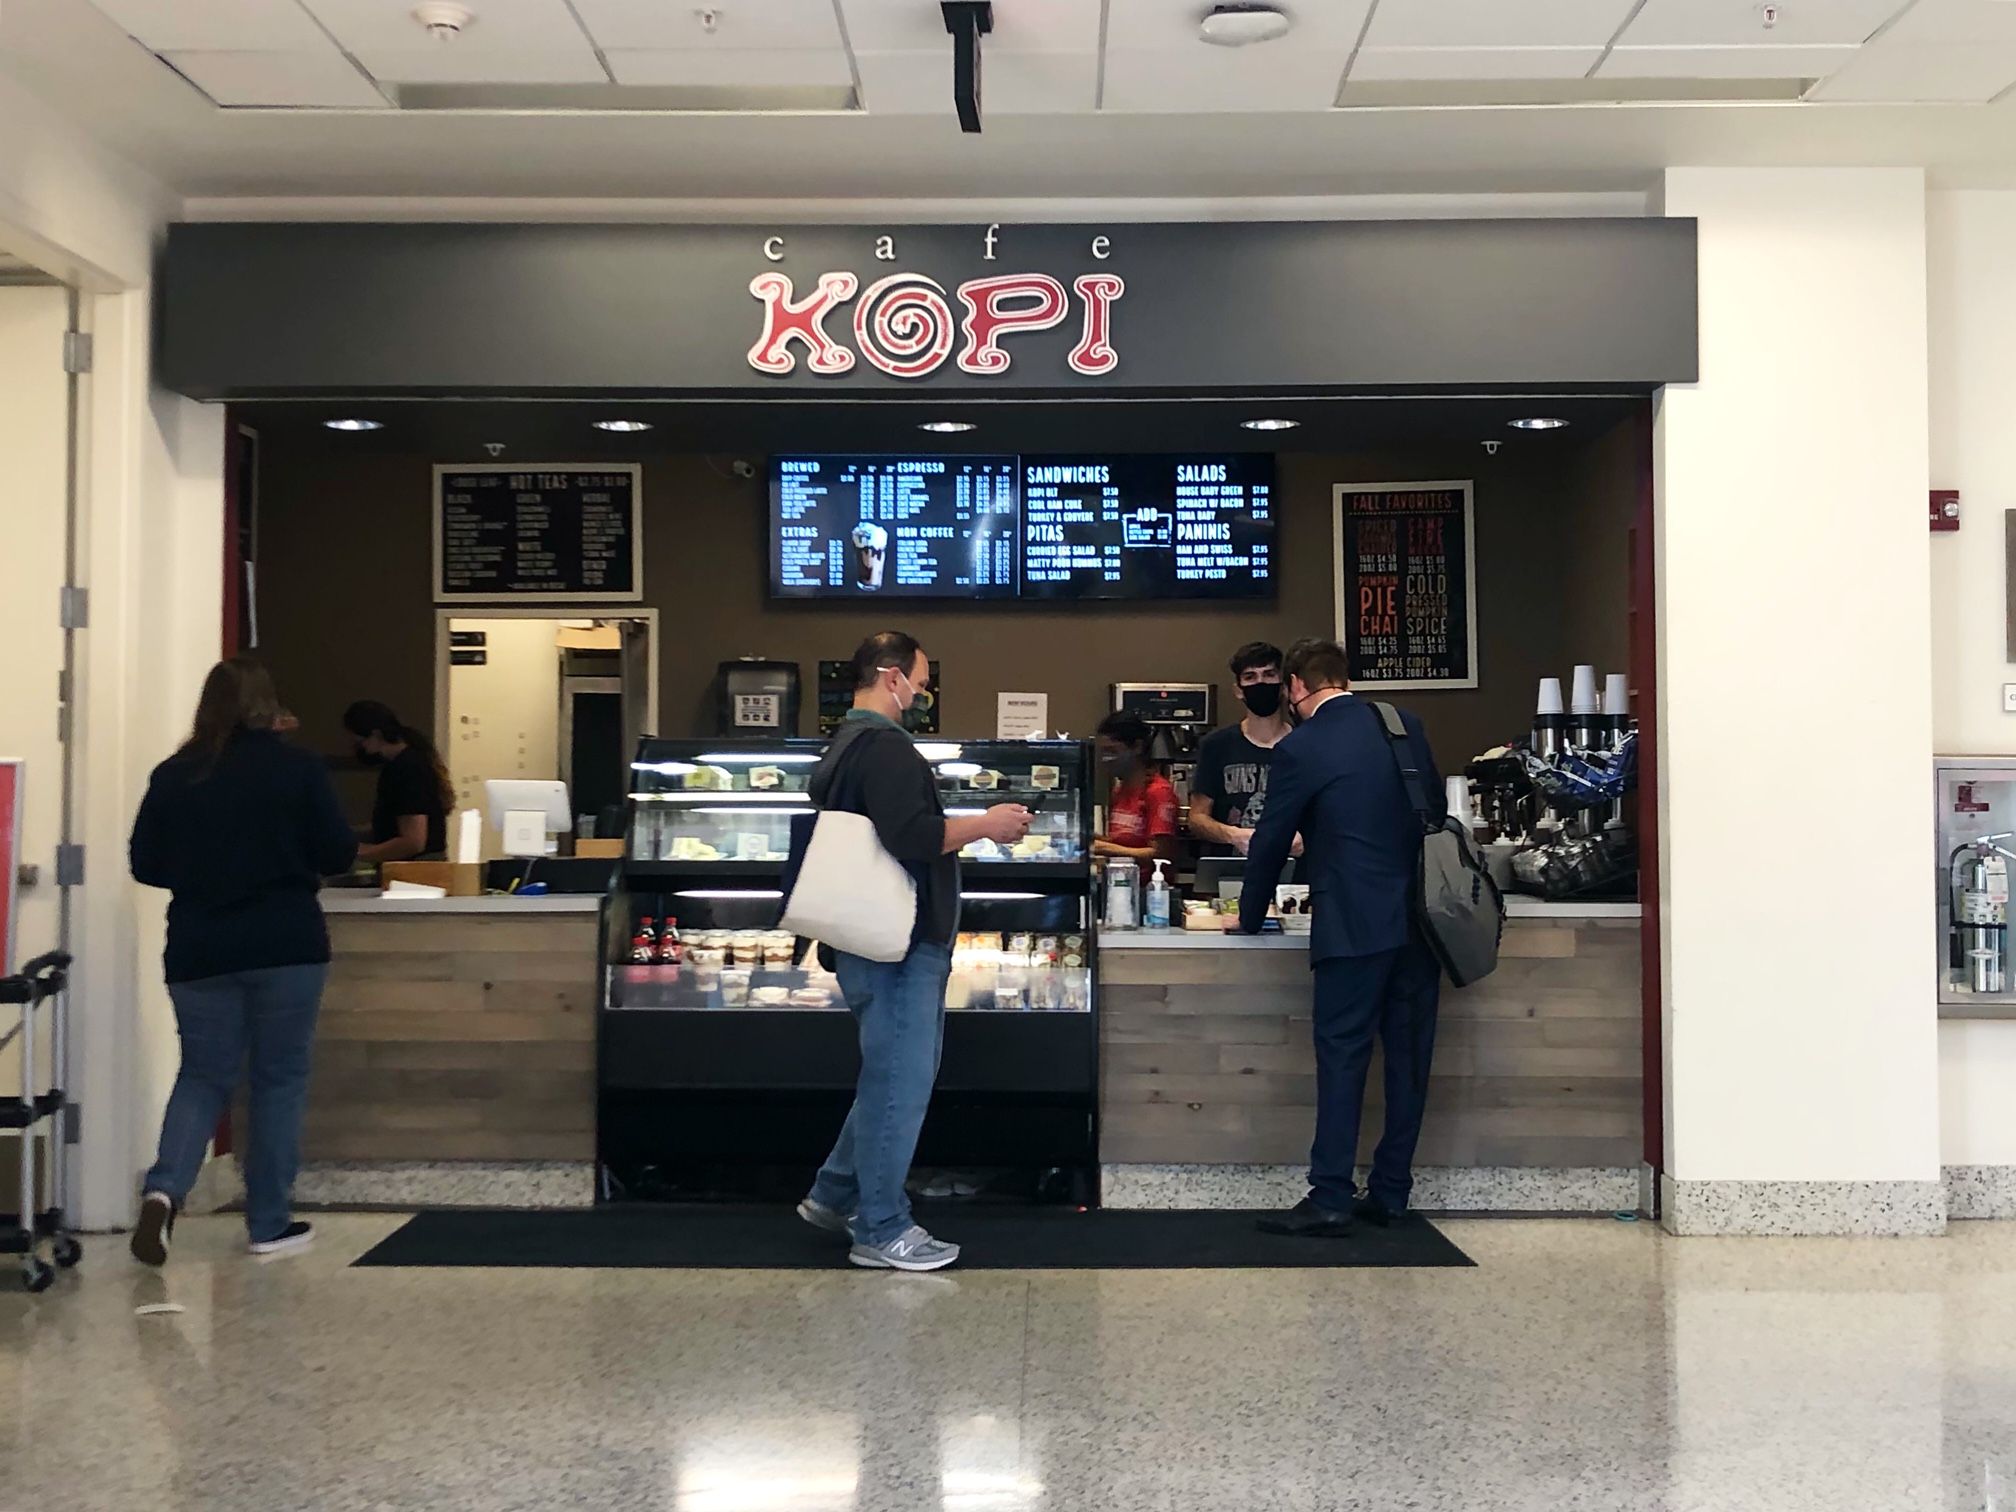 Inside BIF on the U of I campus, there is a small coffee counter with Cafe Kopi sign above it. There are patrons waiting for drinks, ordering, and waiting to order. Photo by Alyssa Buckley.